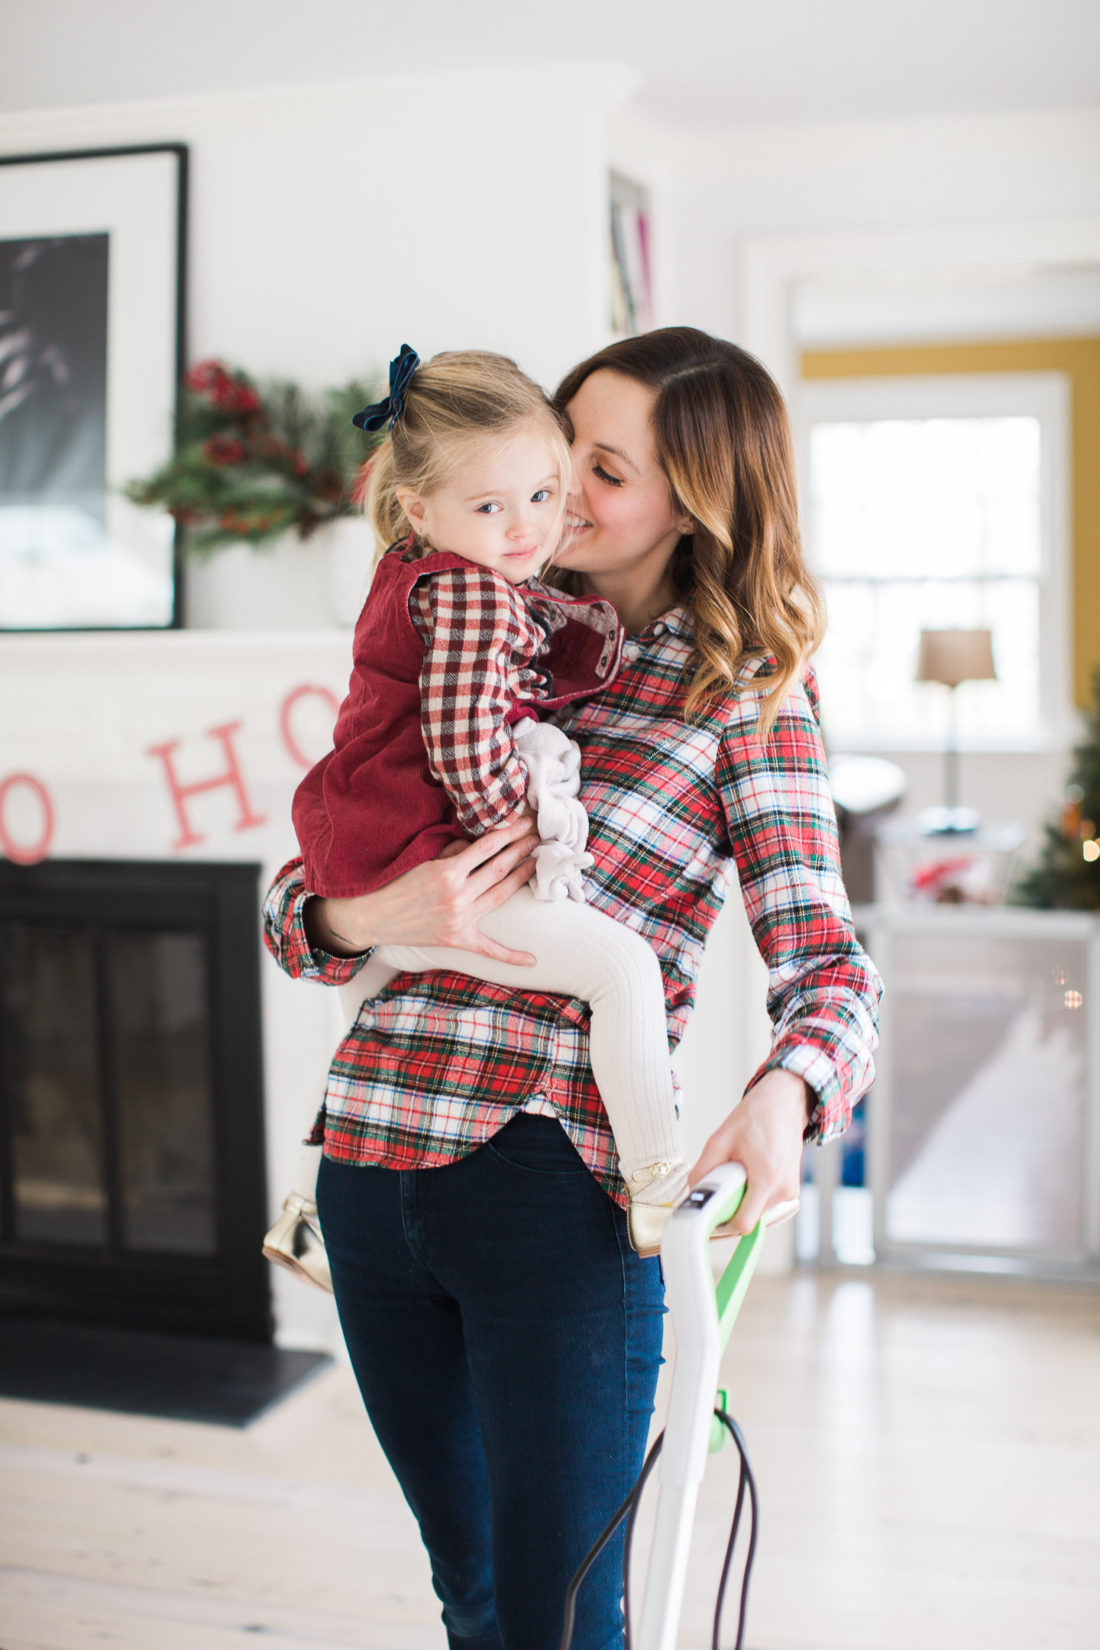 Eva Amurri Martino of lifestyle and motherhood blog Happily Eva After holds her toddler daughter Marlowe in her arms while she vacuums her home and prepares for holiday parties